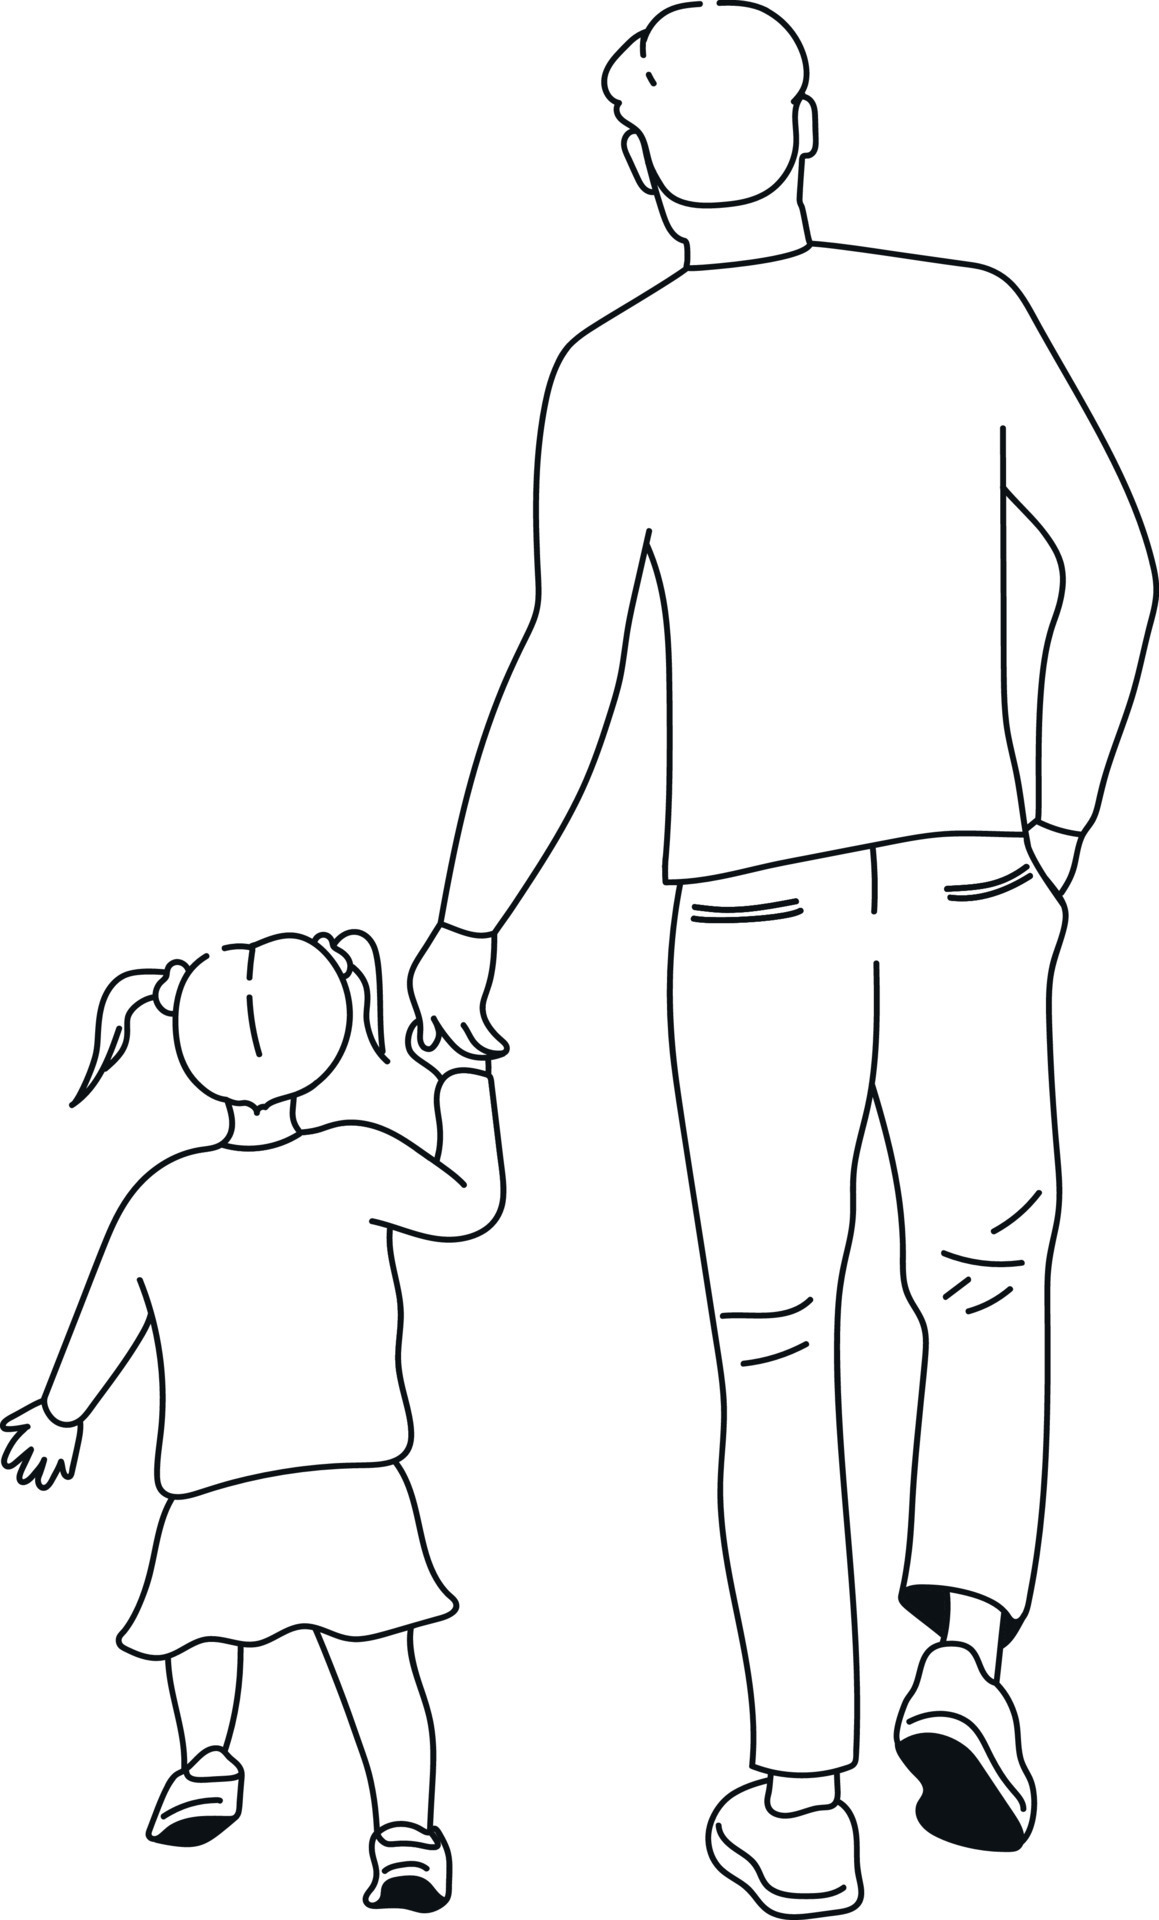 Kid father daughter drawing Royalty Free Vector Image-saigonsouth.com.vn